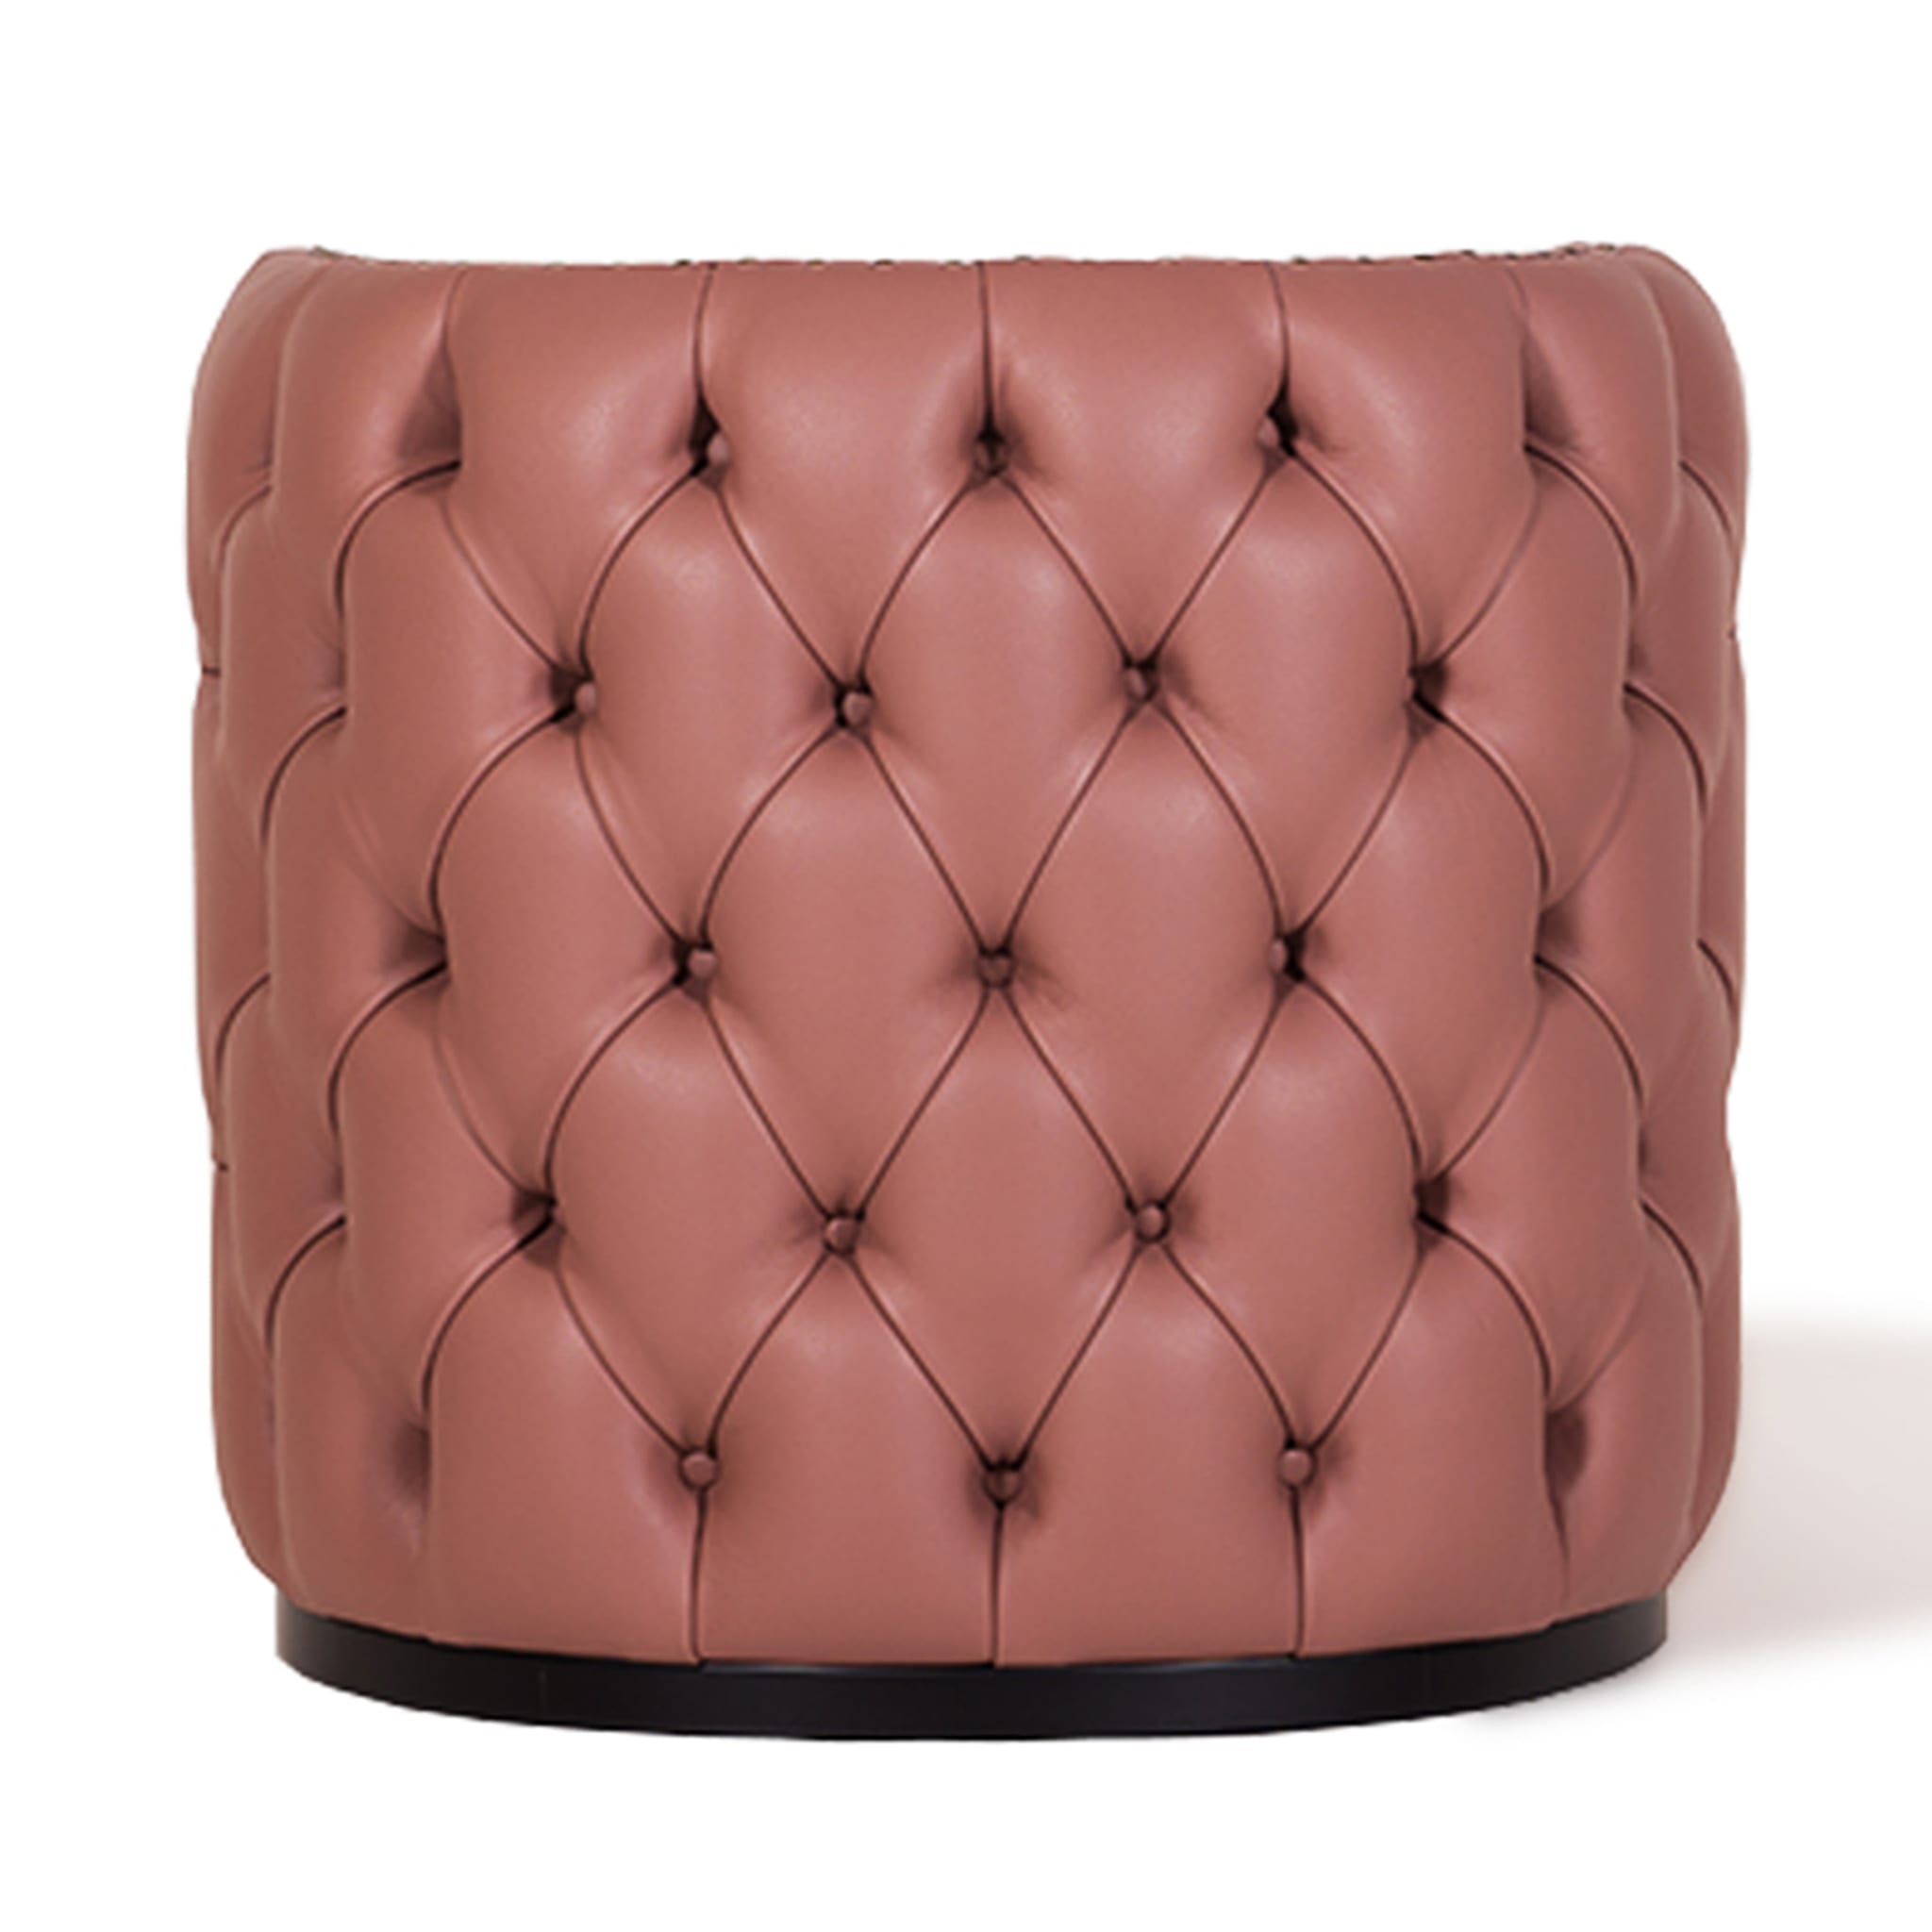 Petra Leather Armchair by Marco & Giulio Mantellassi - Alternative view 4